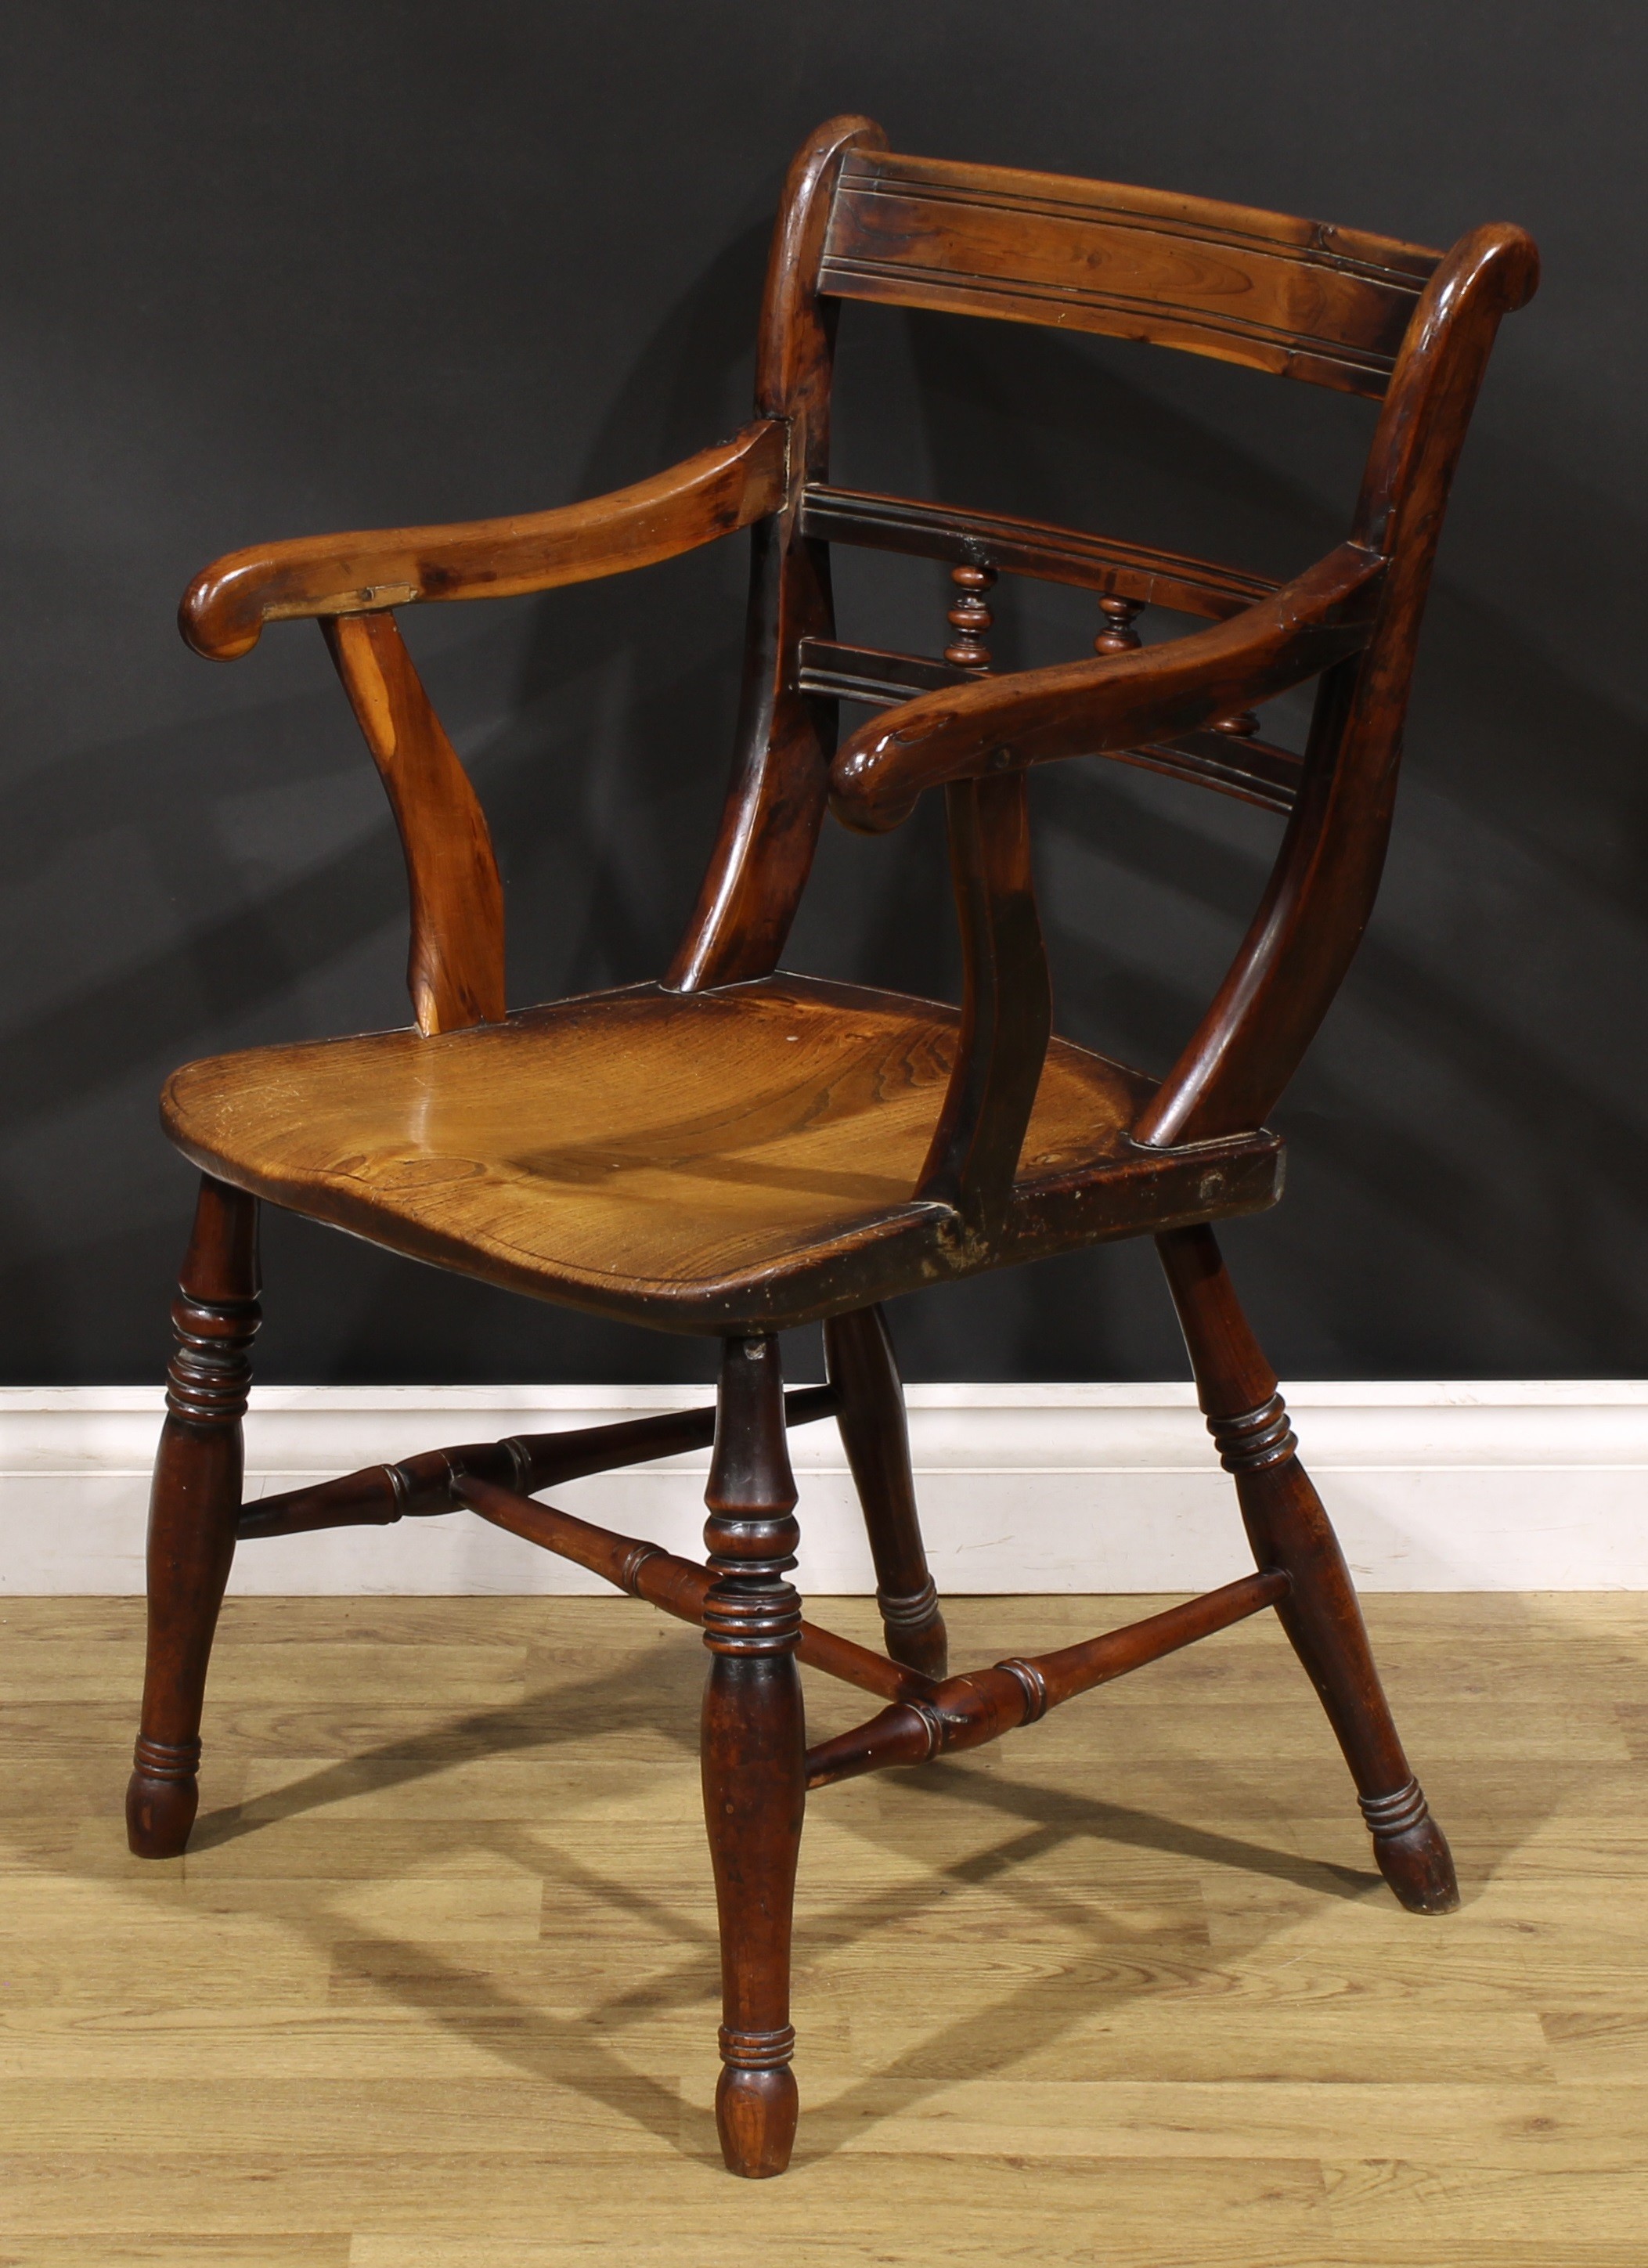 An early 19th century yew and elm elbow chair, saddle seat, turned legs, H-stretcher, 86cm high, - Image 3 of 4